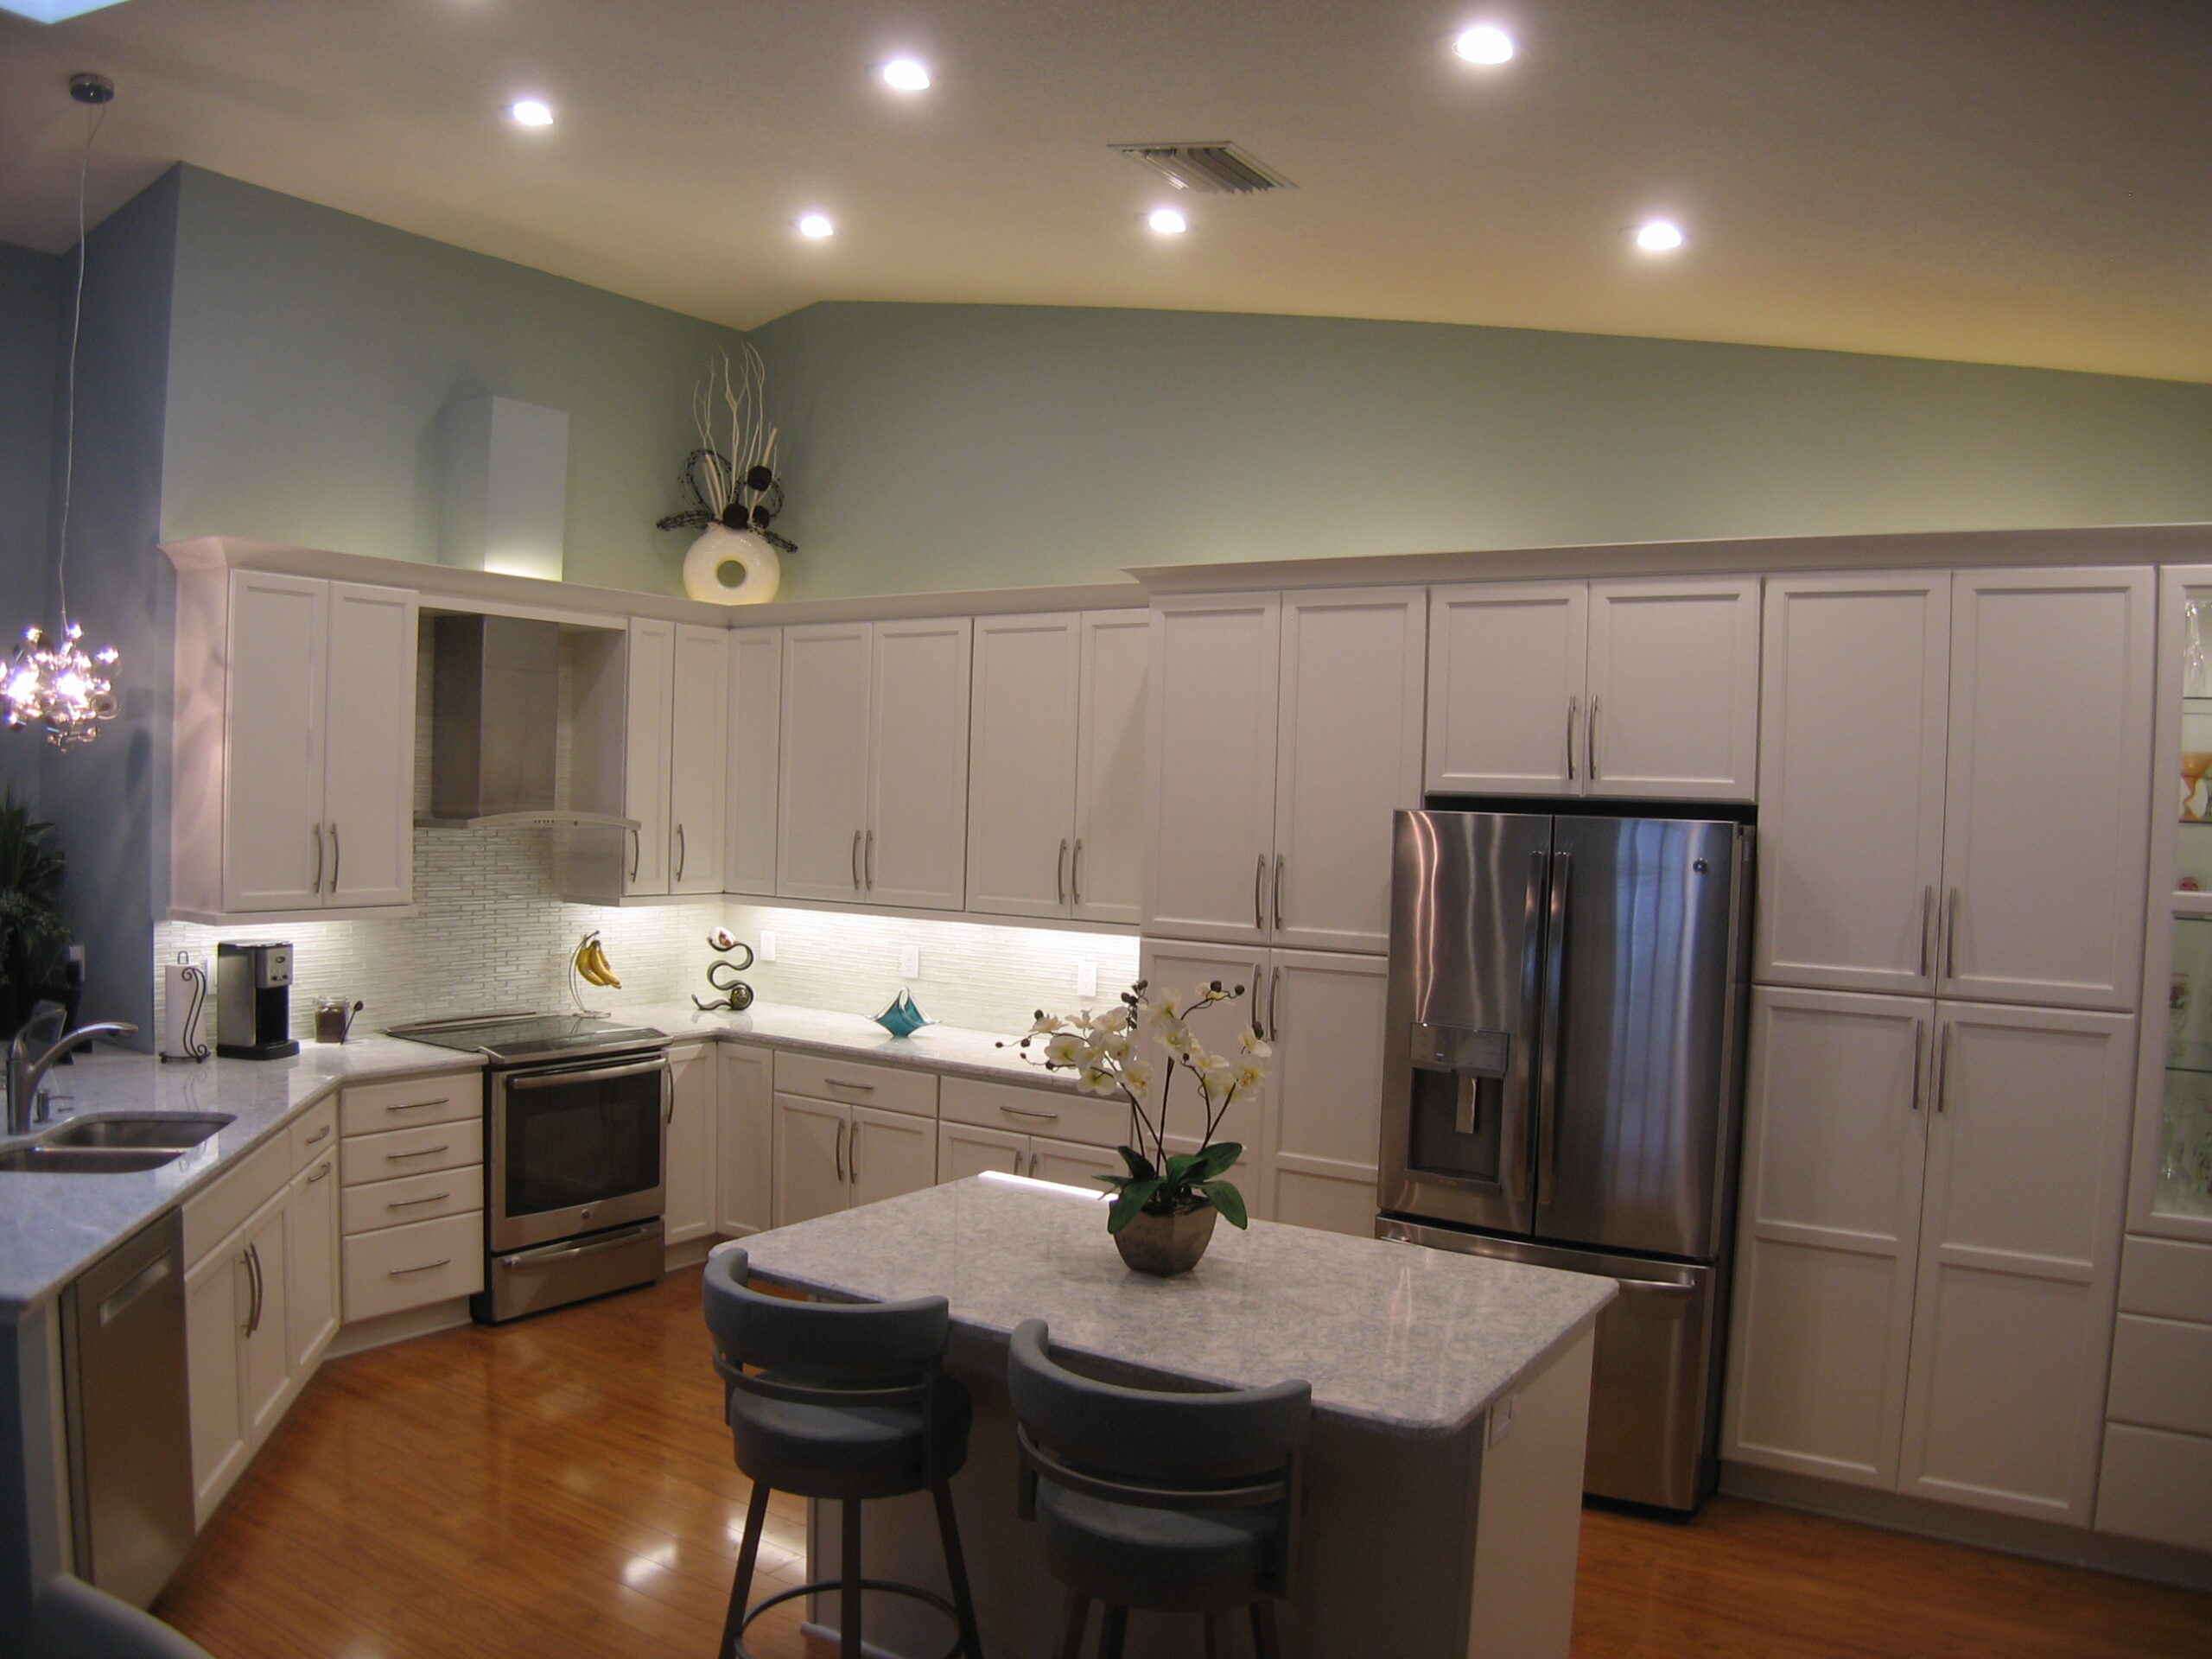 Kitchen Remodeling Tips When Selling Your Home Soon